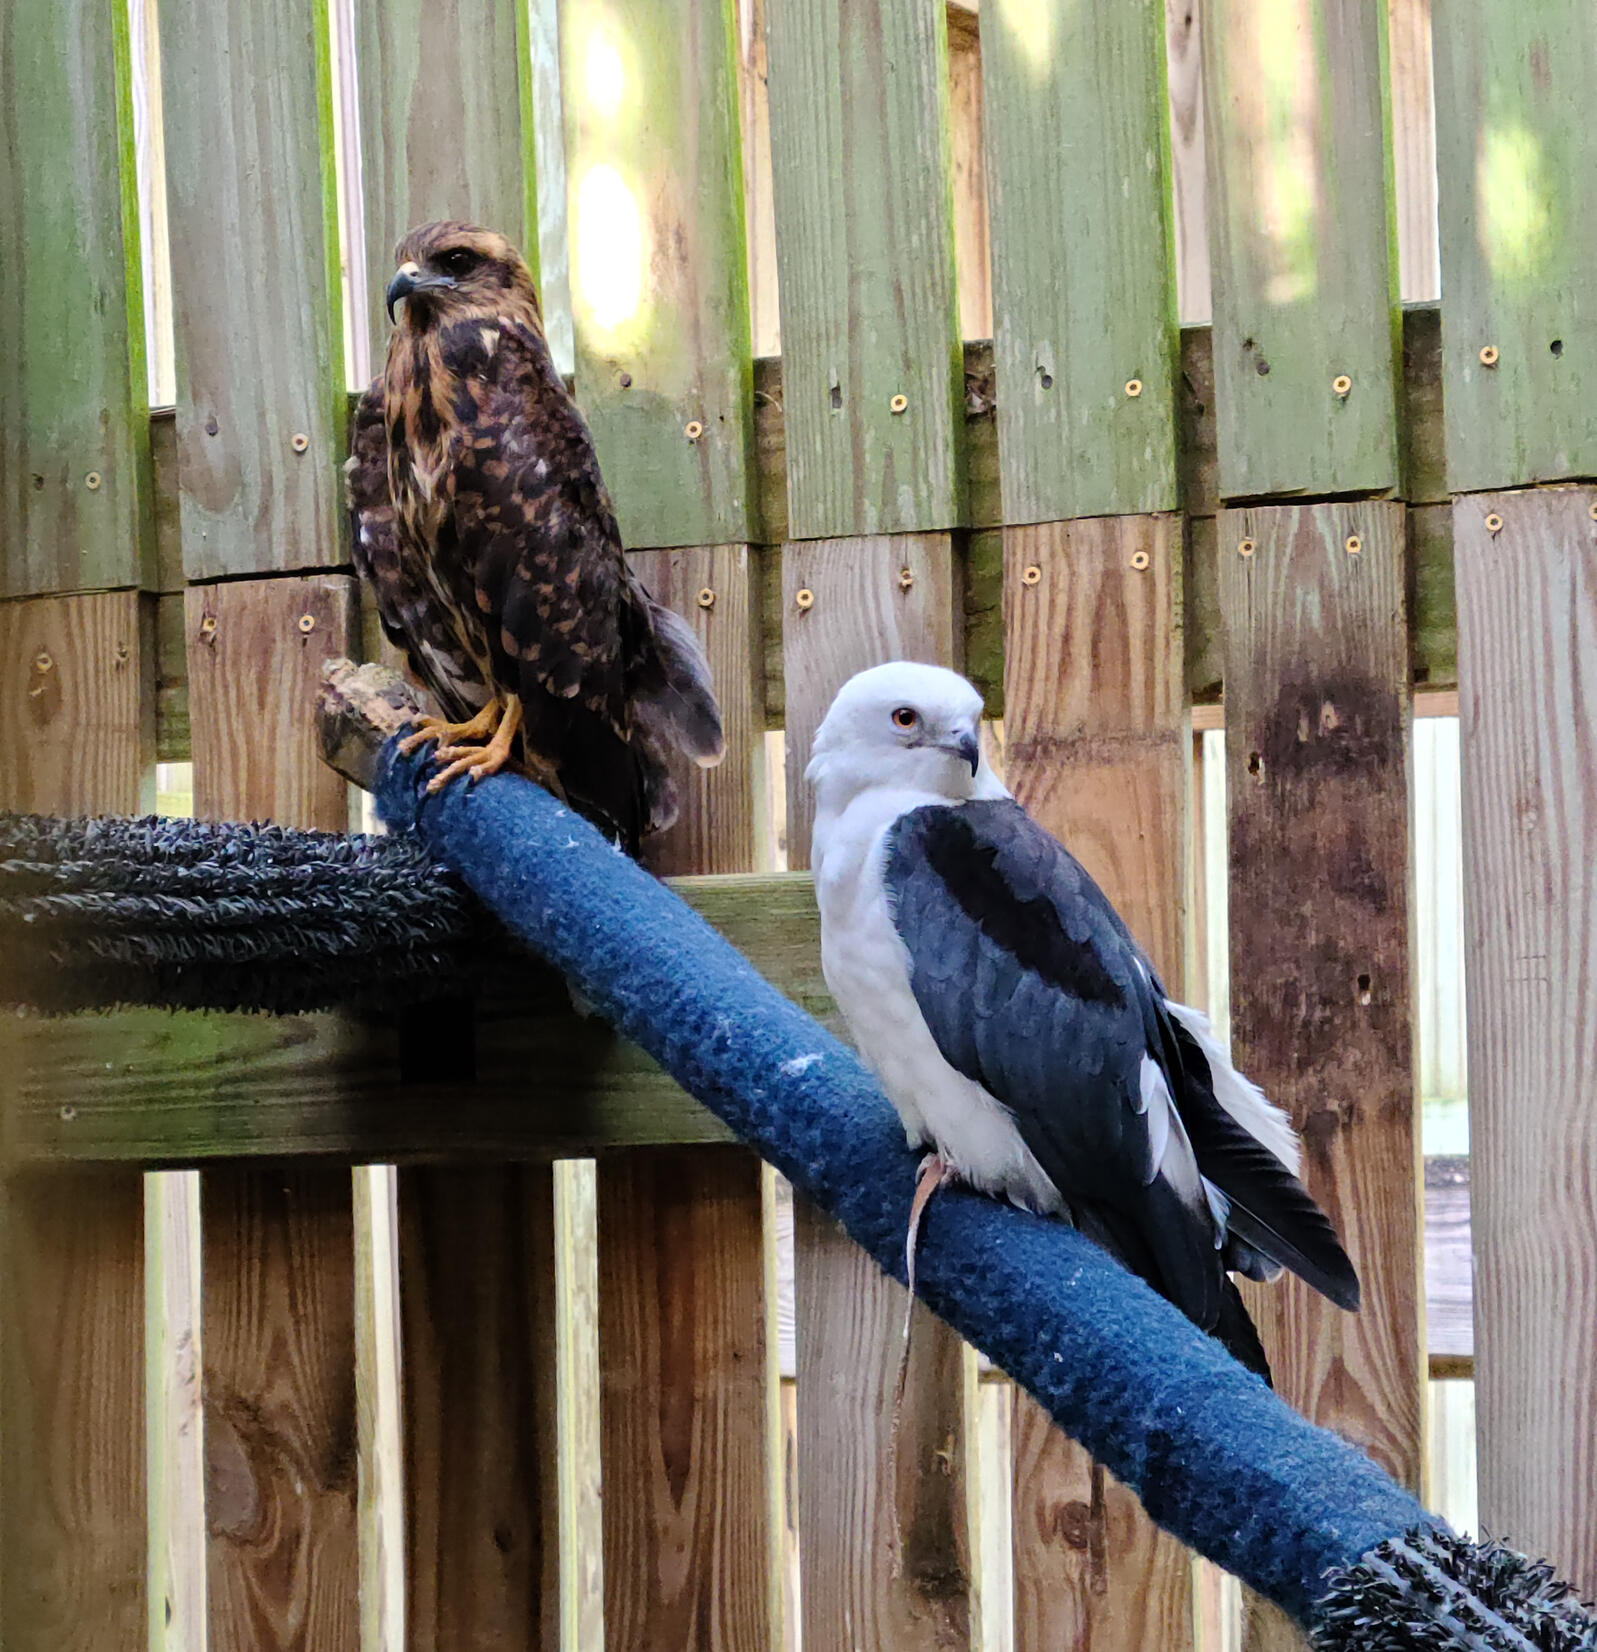 The Snail and Swallow-tailed Kites sitting side by side at the Center for Birds of Prey. Photo: Tabitha Smith